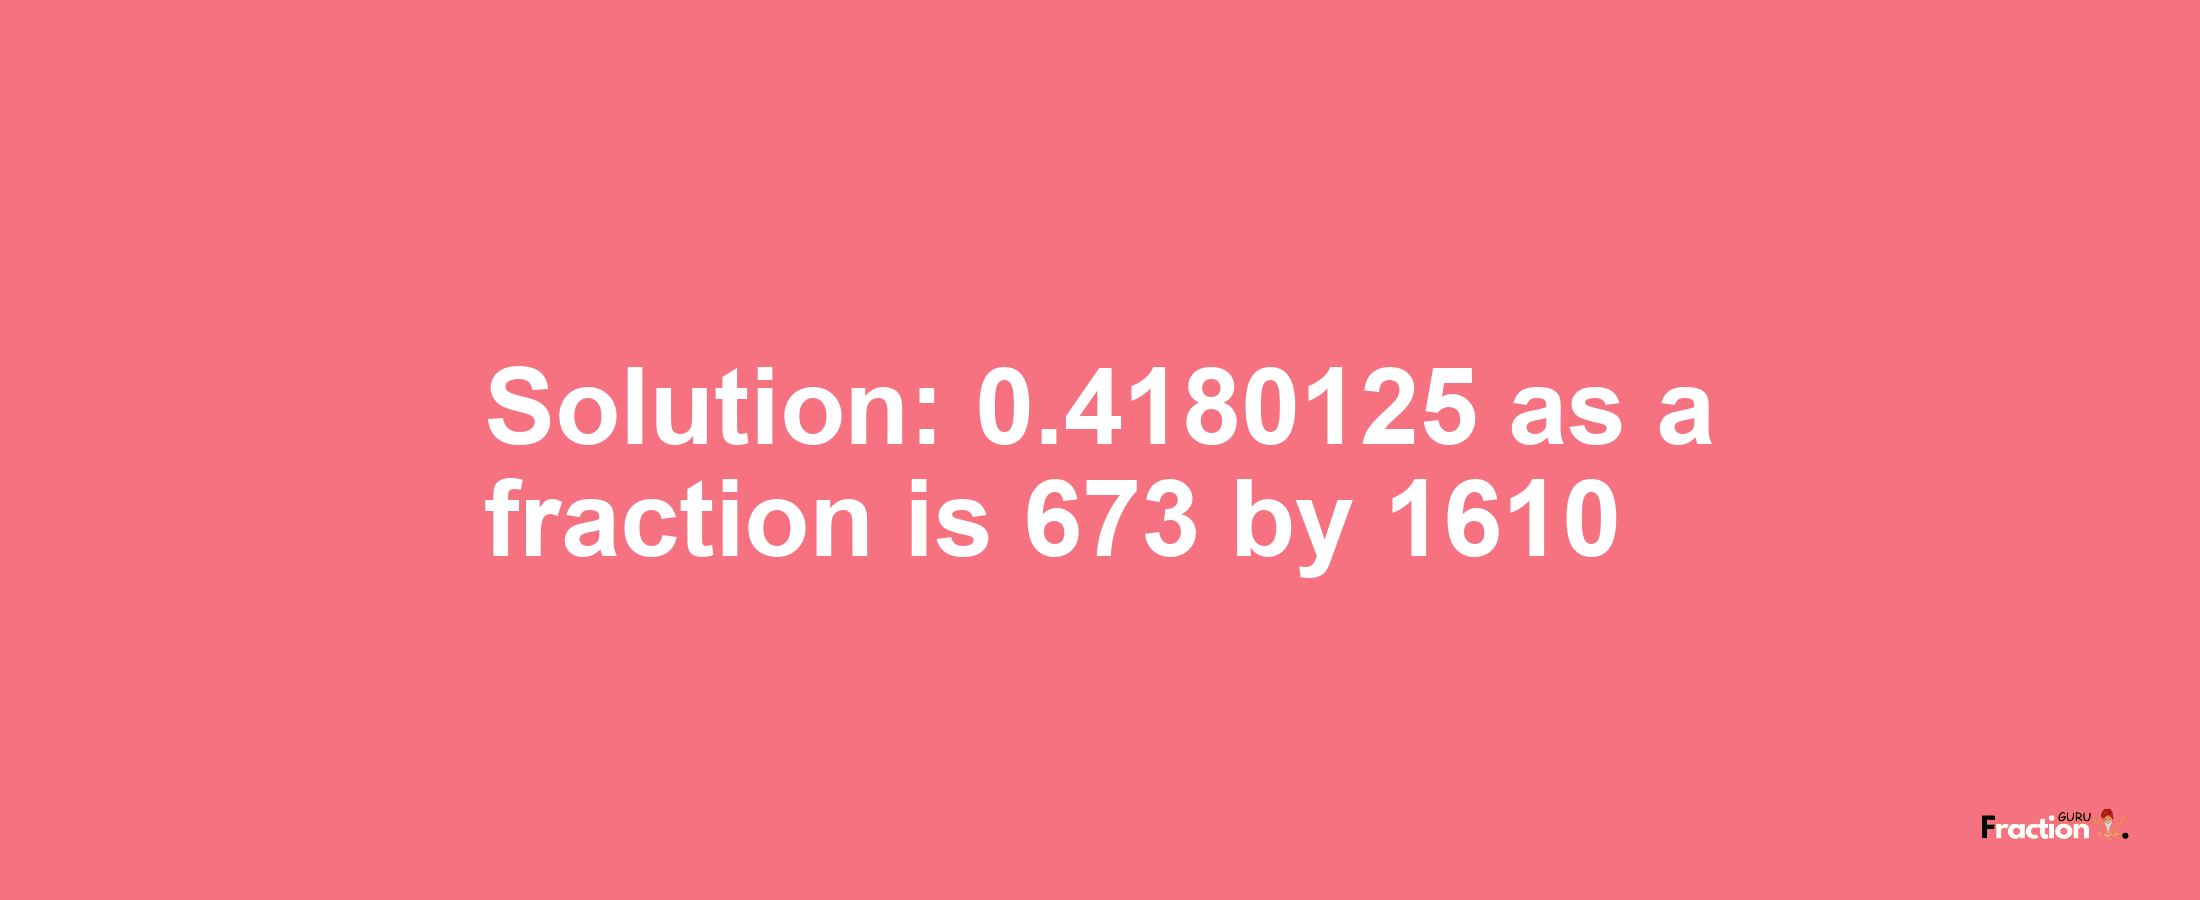 Solution:0.4180125 as a fraction is 673/1610